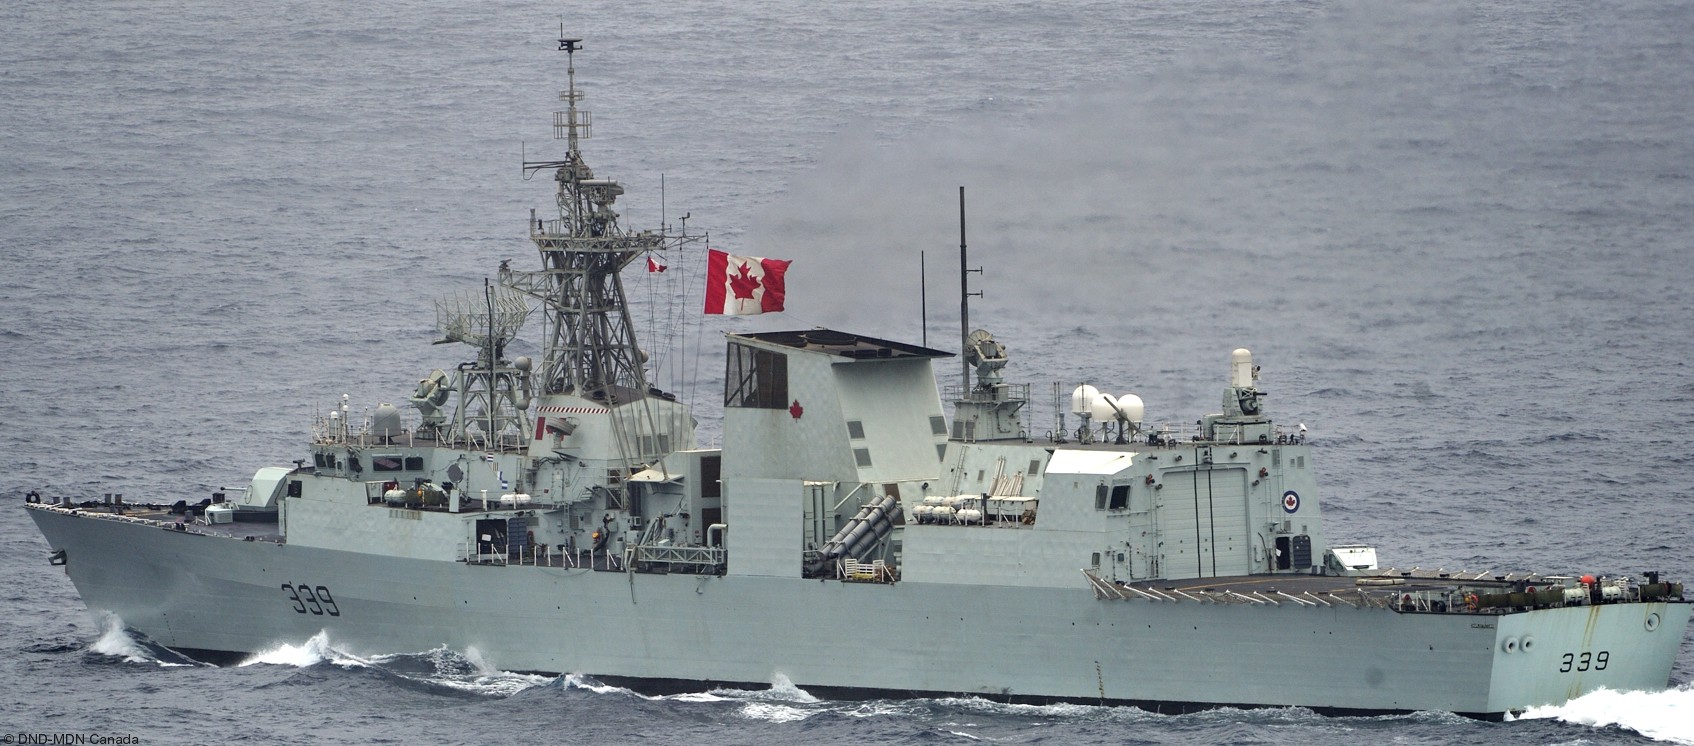 ffh-339 hmcs charlottetown halifax class helicopter patrol frigate ncsm royal canadian navy 35